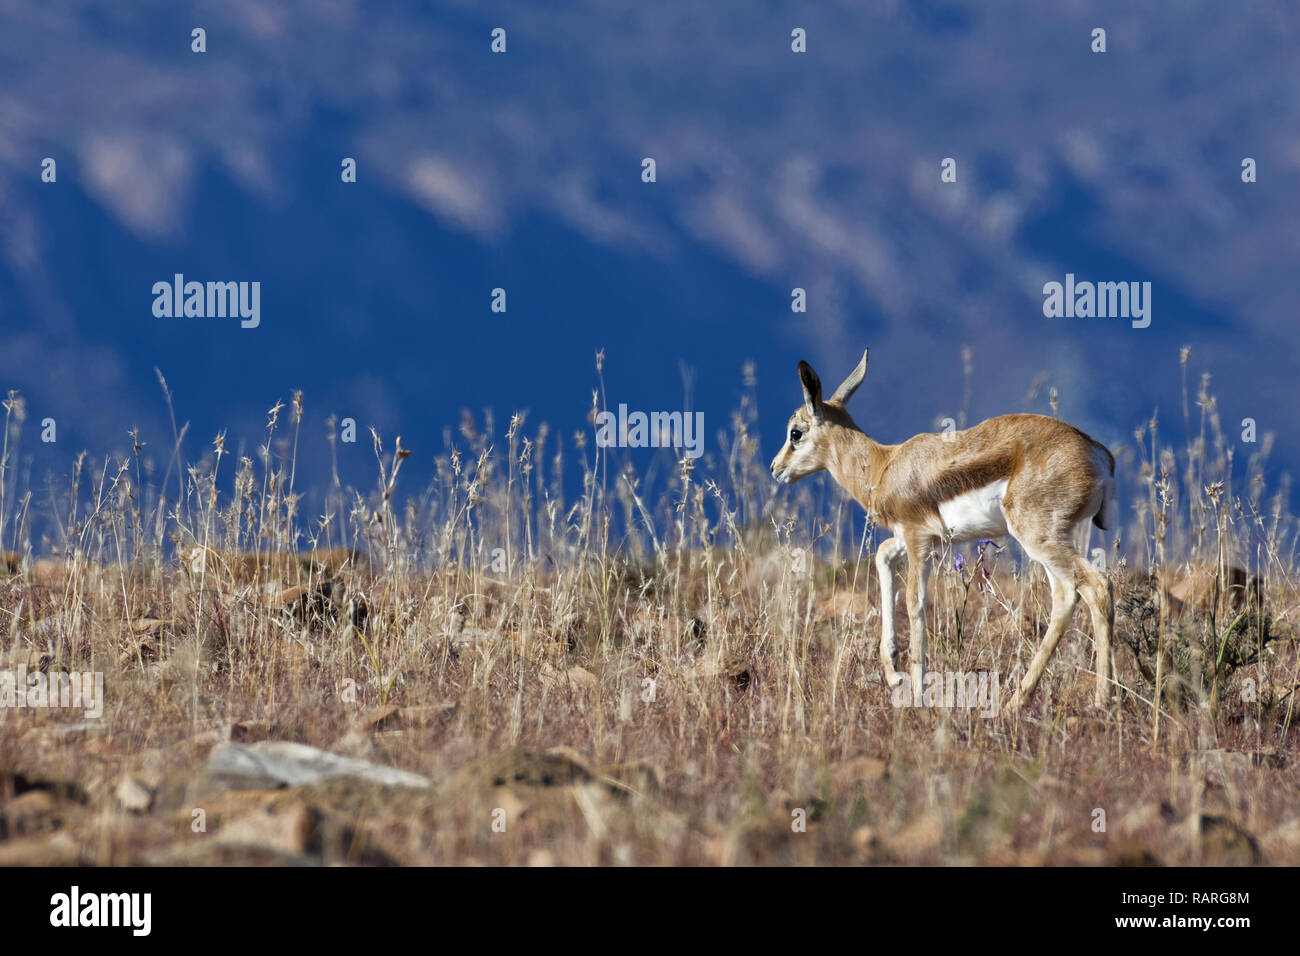 Springbok (Antidorcas marsupialis), young, walking in high dry grass, Mountain Zebra National Park, Eastern Cape, South Africa, Africa Stock Photo